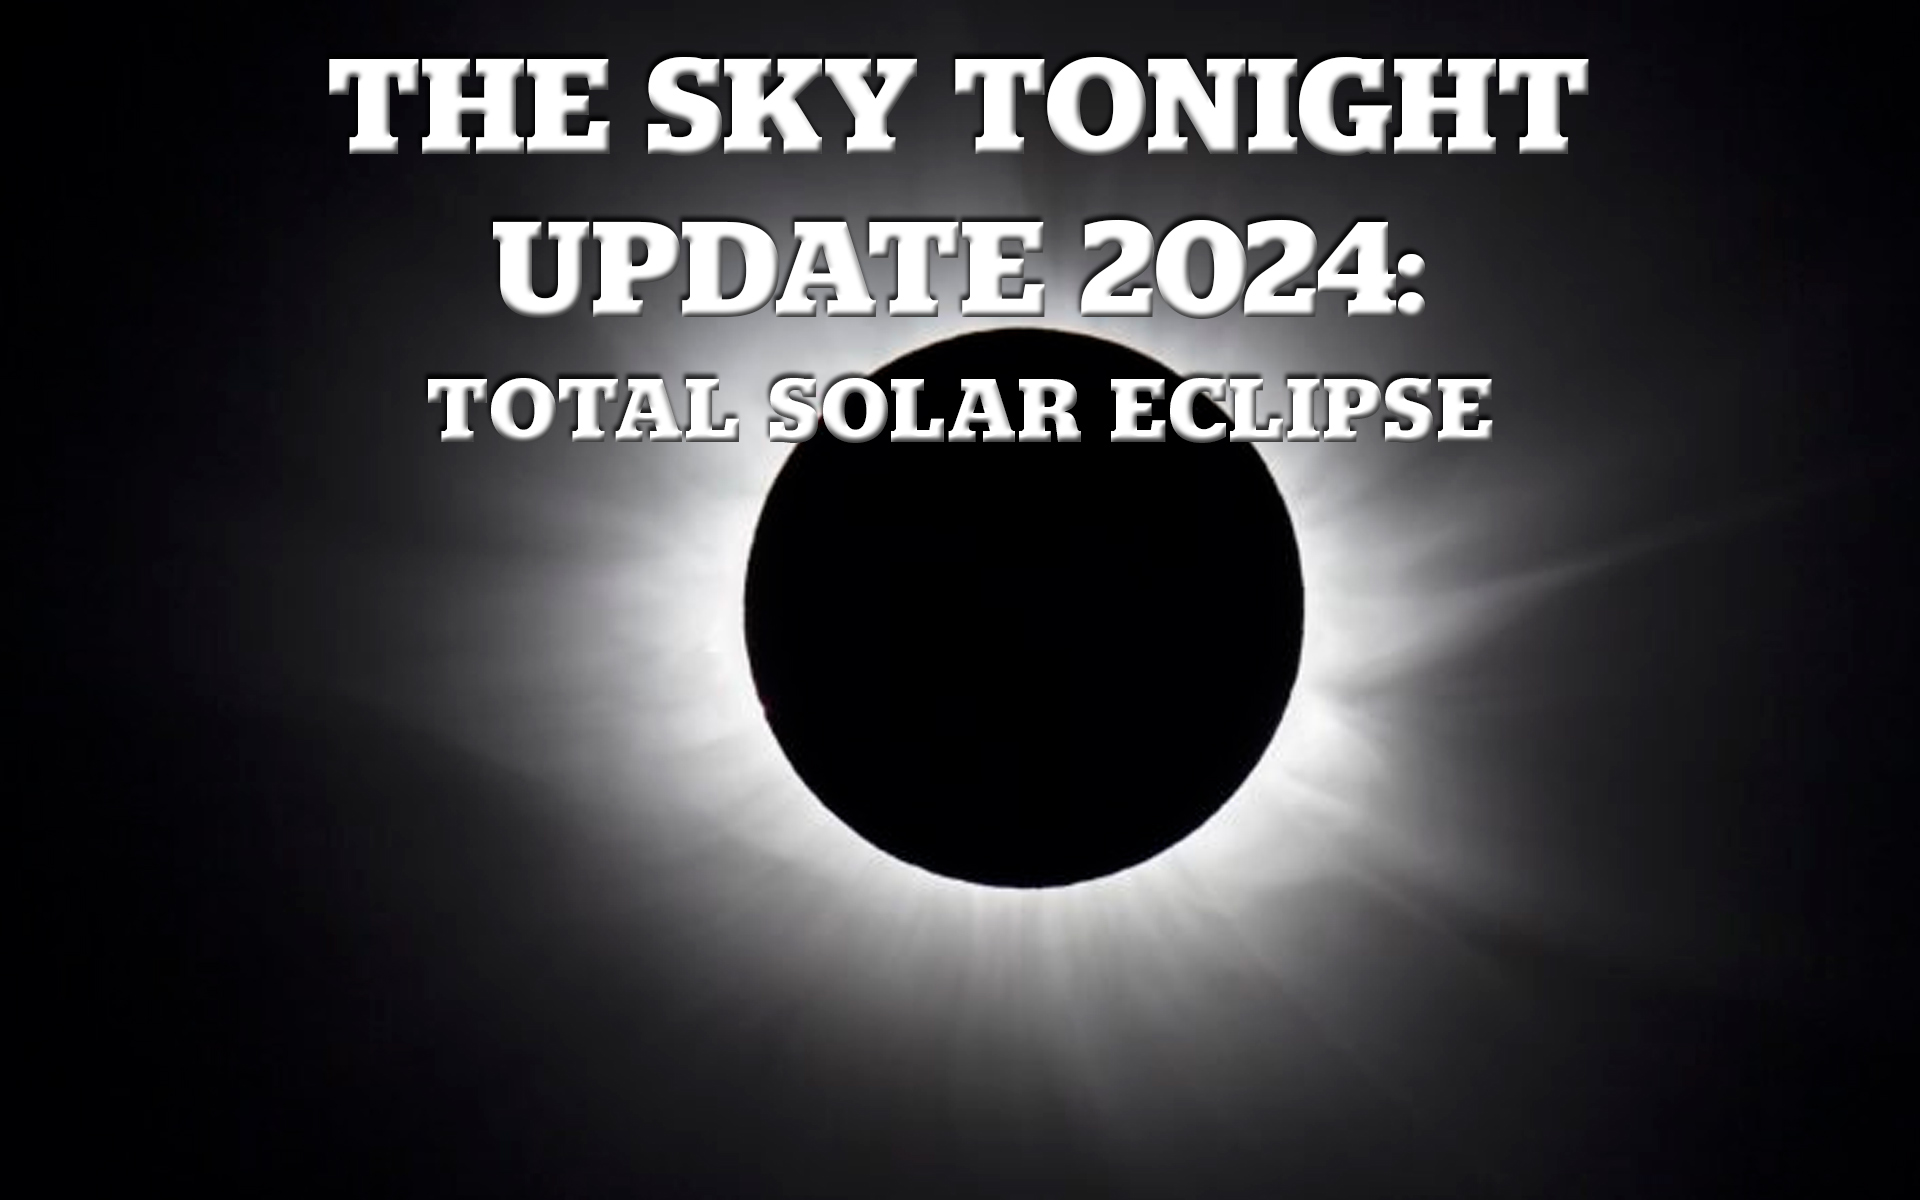 The Sky Tonight Update: Total Solar Eclipse